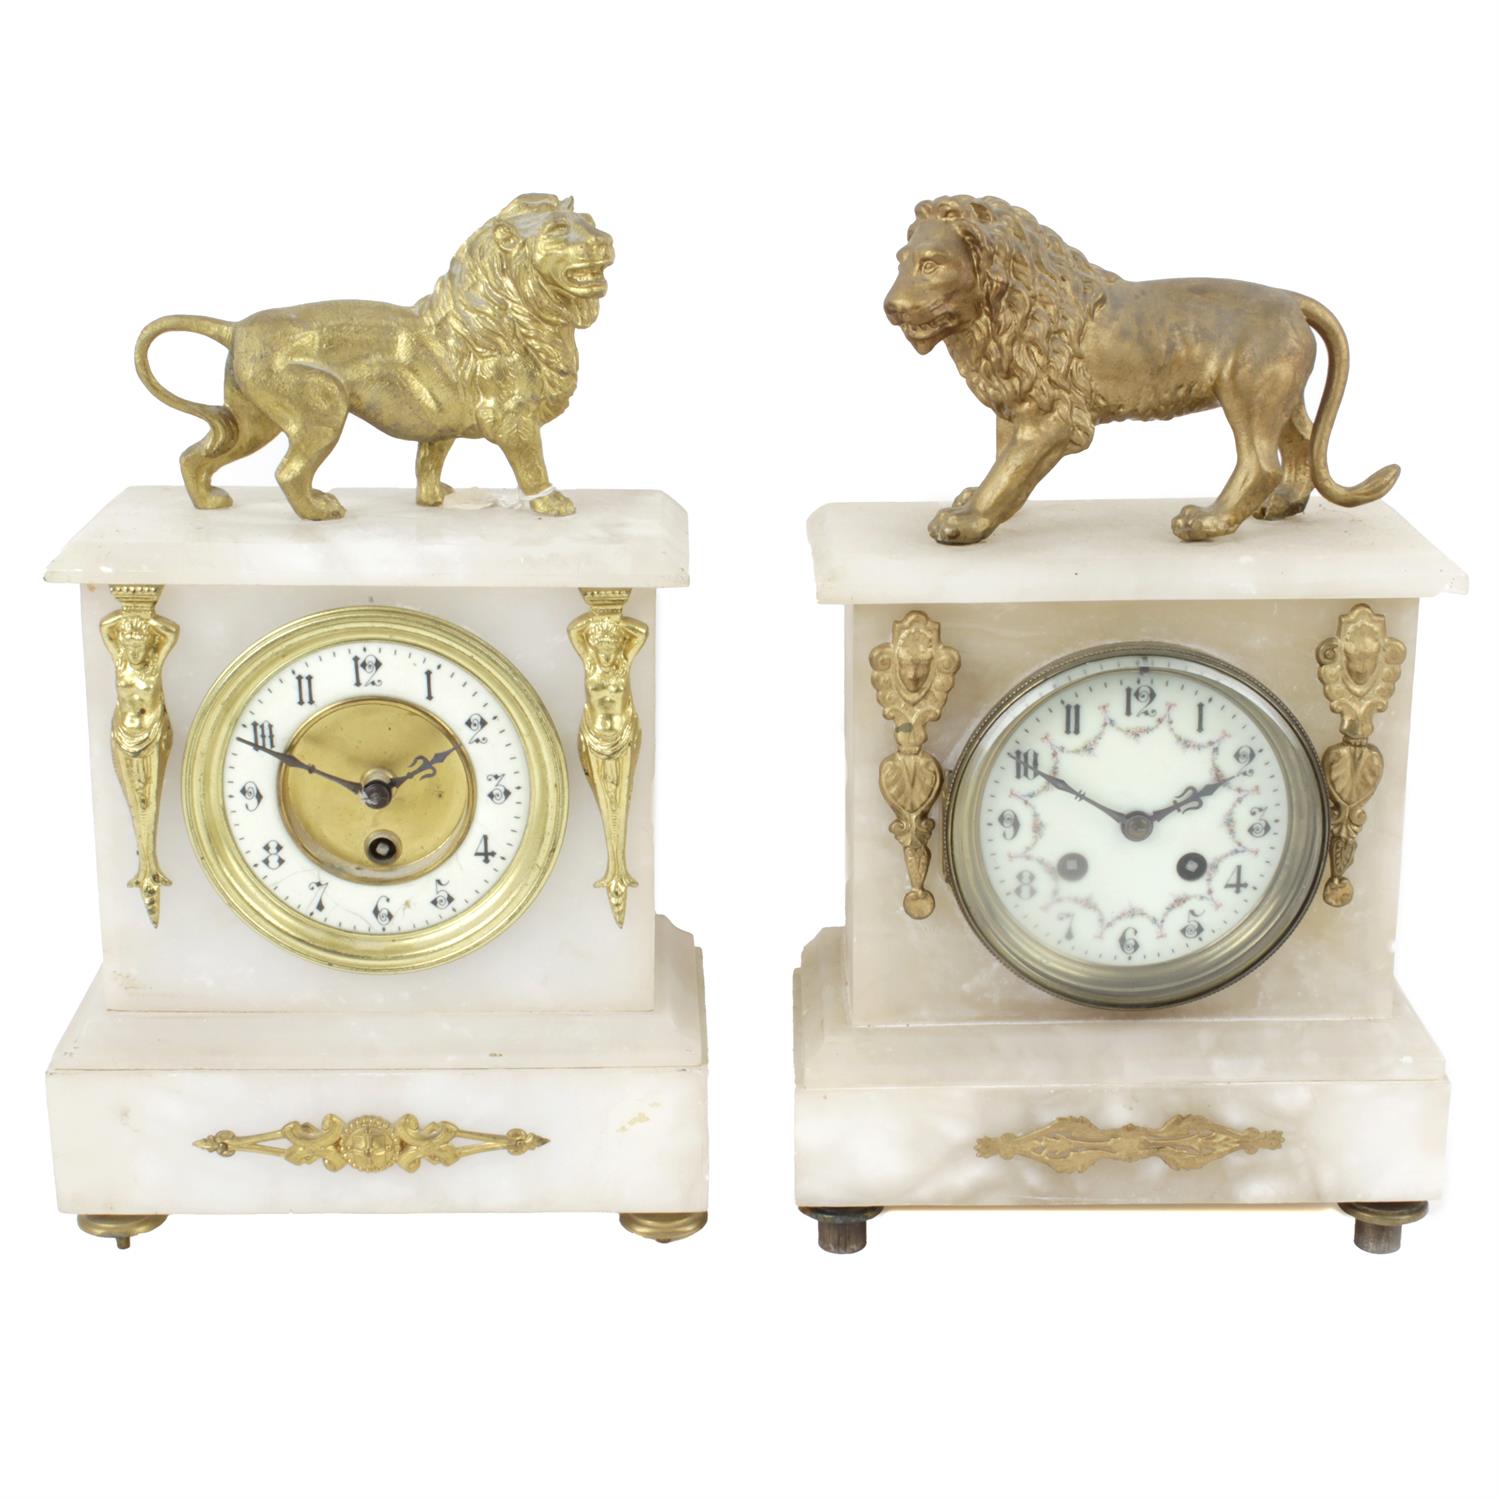 Two 20th century mantel clocks with gilt lion finials